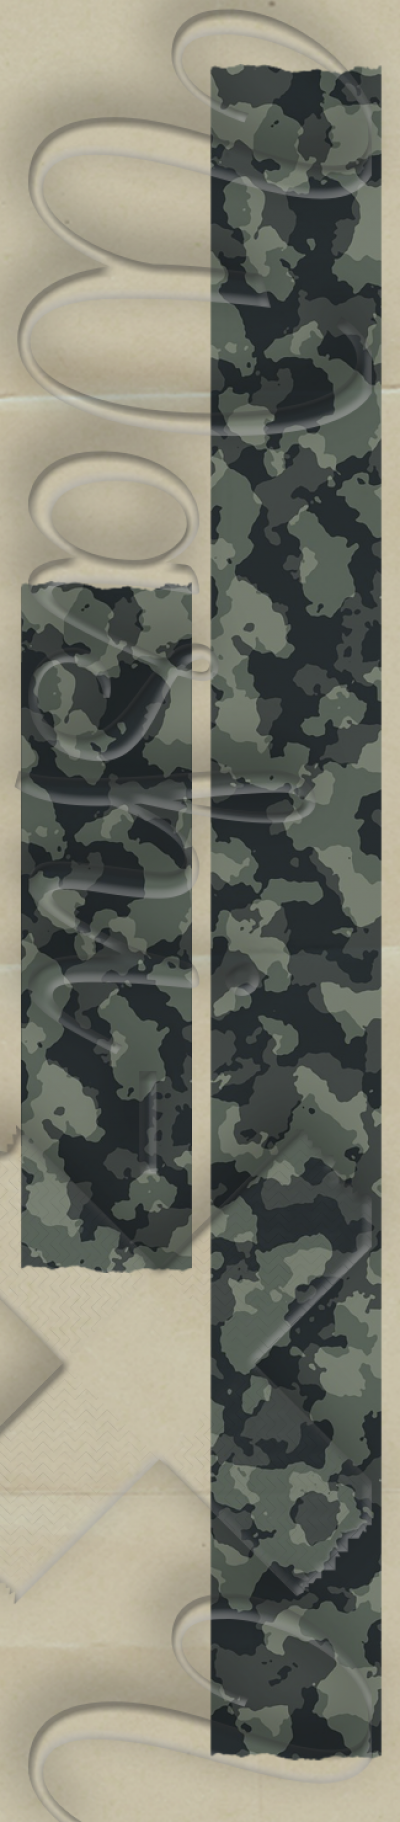 Army patterned washi tape